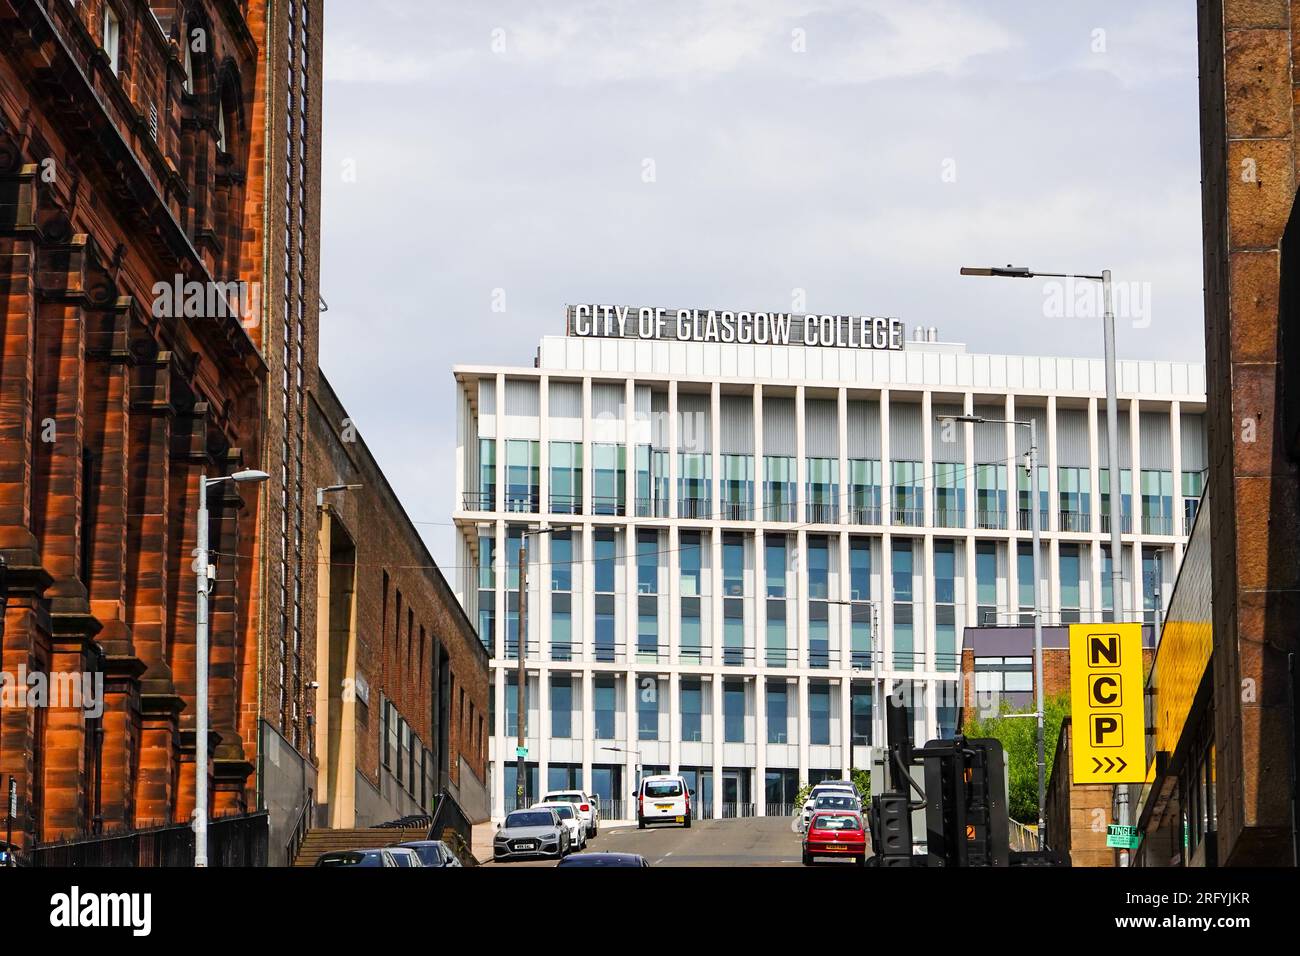 City of Glasgow College, located in the city center, Glasgow, Scotland, UK. Stock Photo